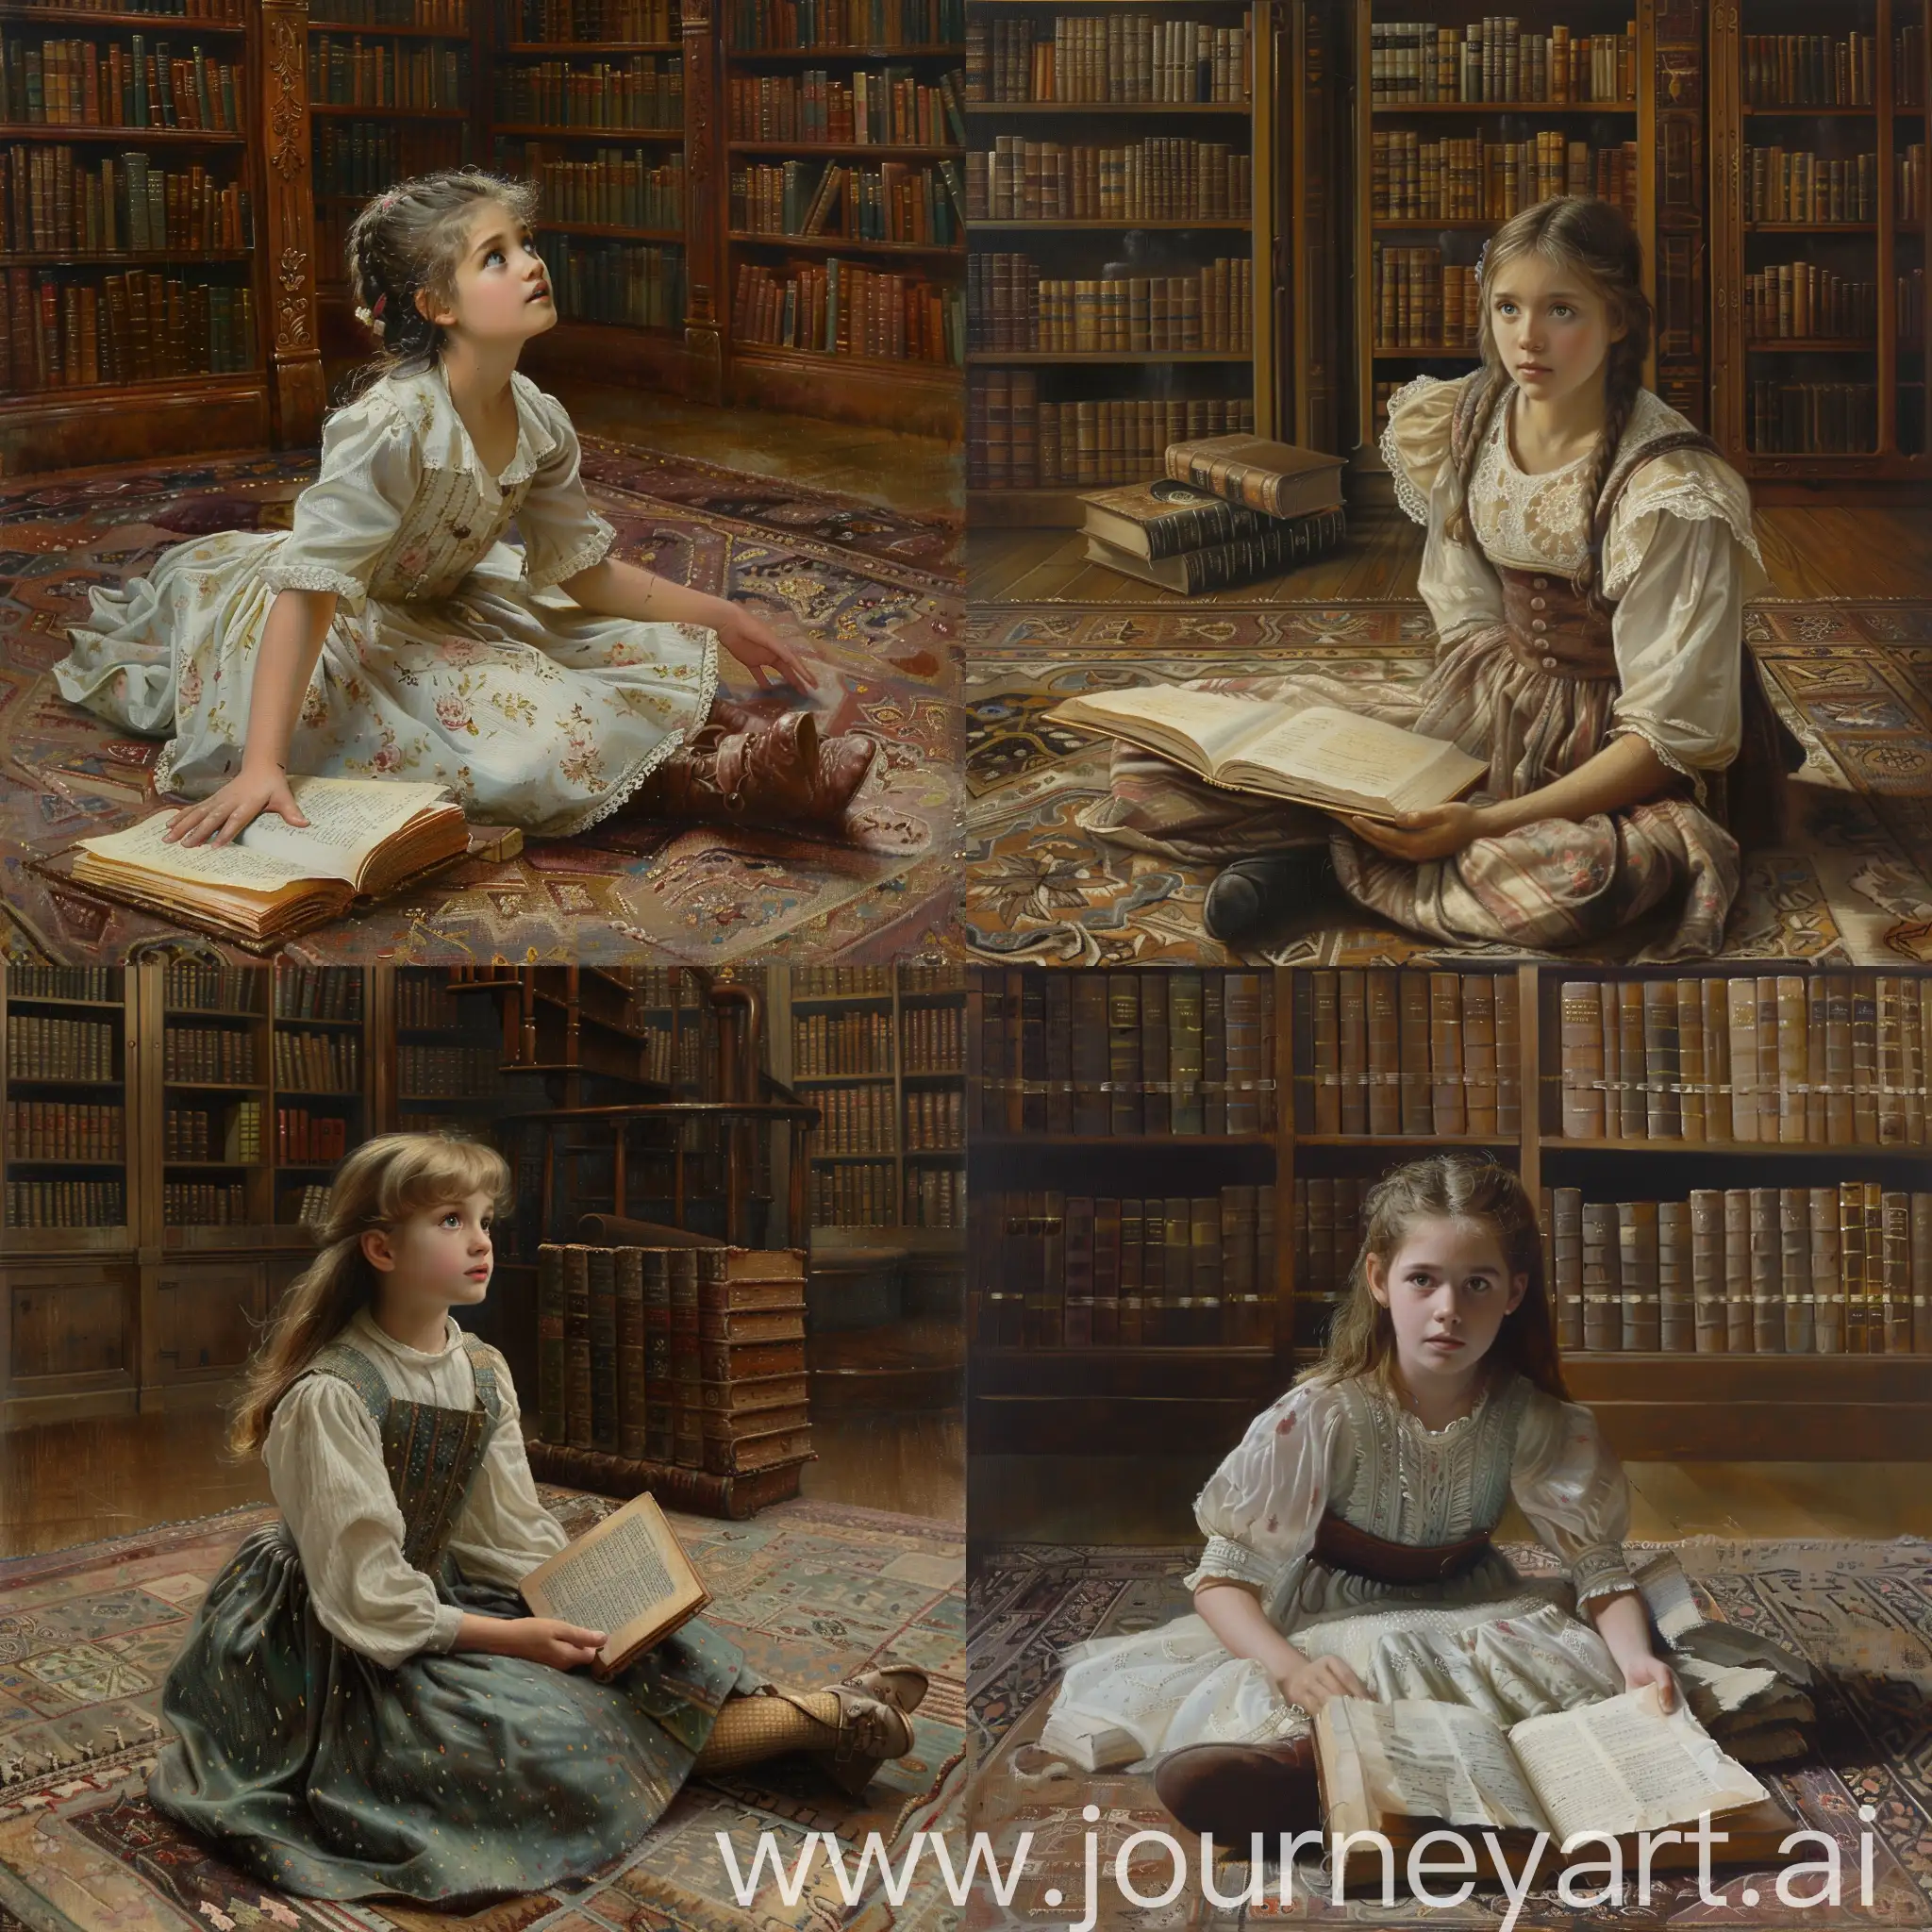   oil painting, scene of the 19th century, young Girl sitting on the floor with an open book, in the background is an old library